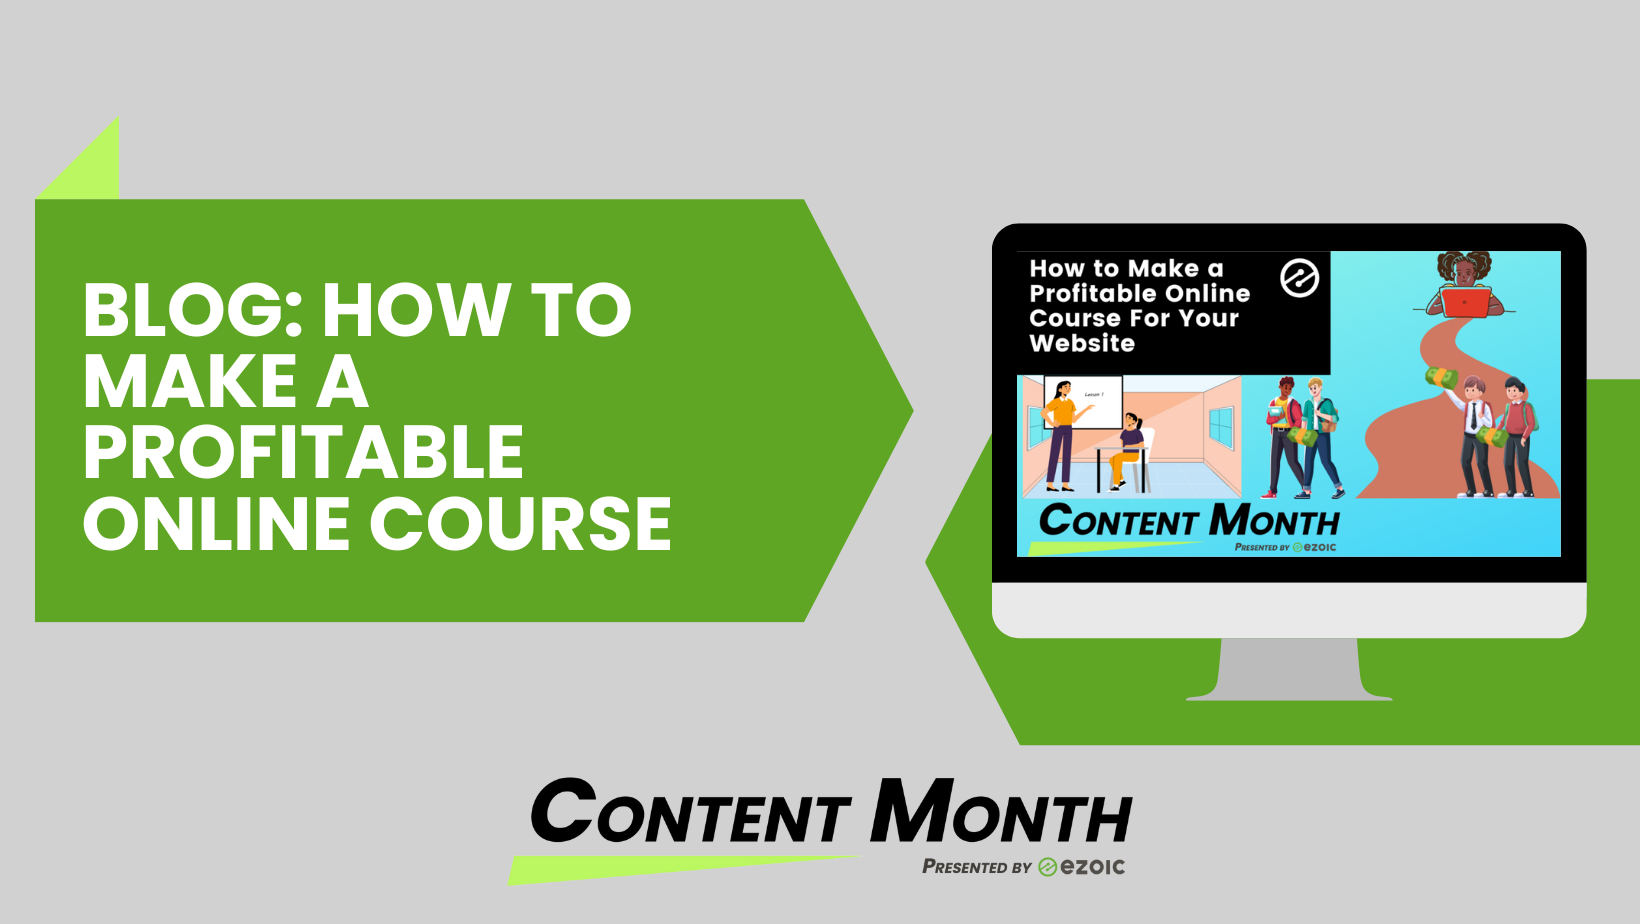 How to Make a Profitable Online Course